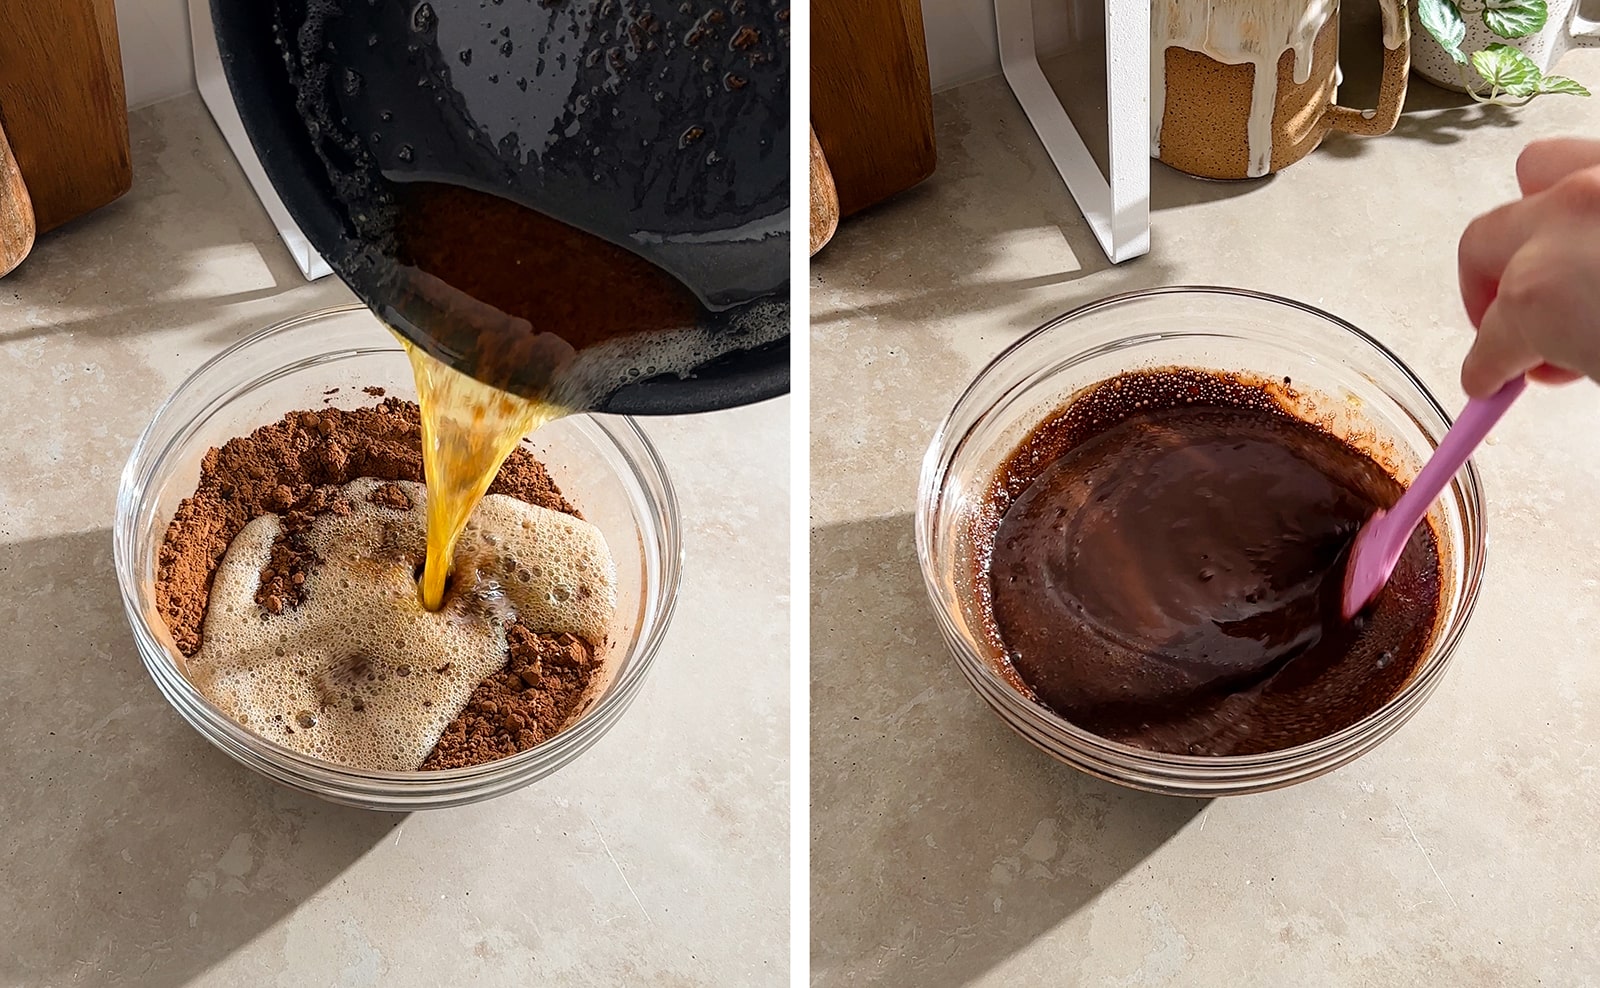 Left to right: pouring browned butter into bowl of chocolate, stirring melted chocolate mixture in a bowl.